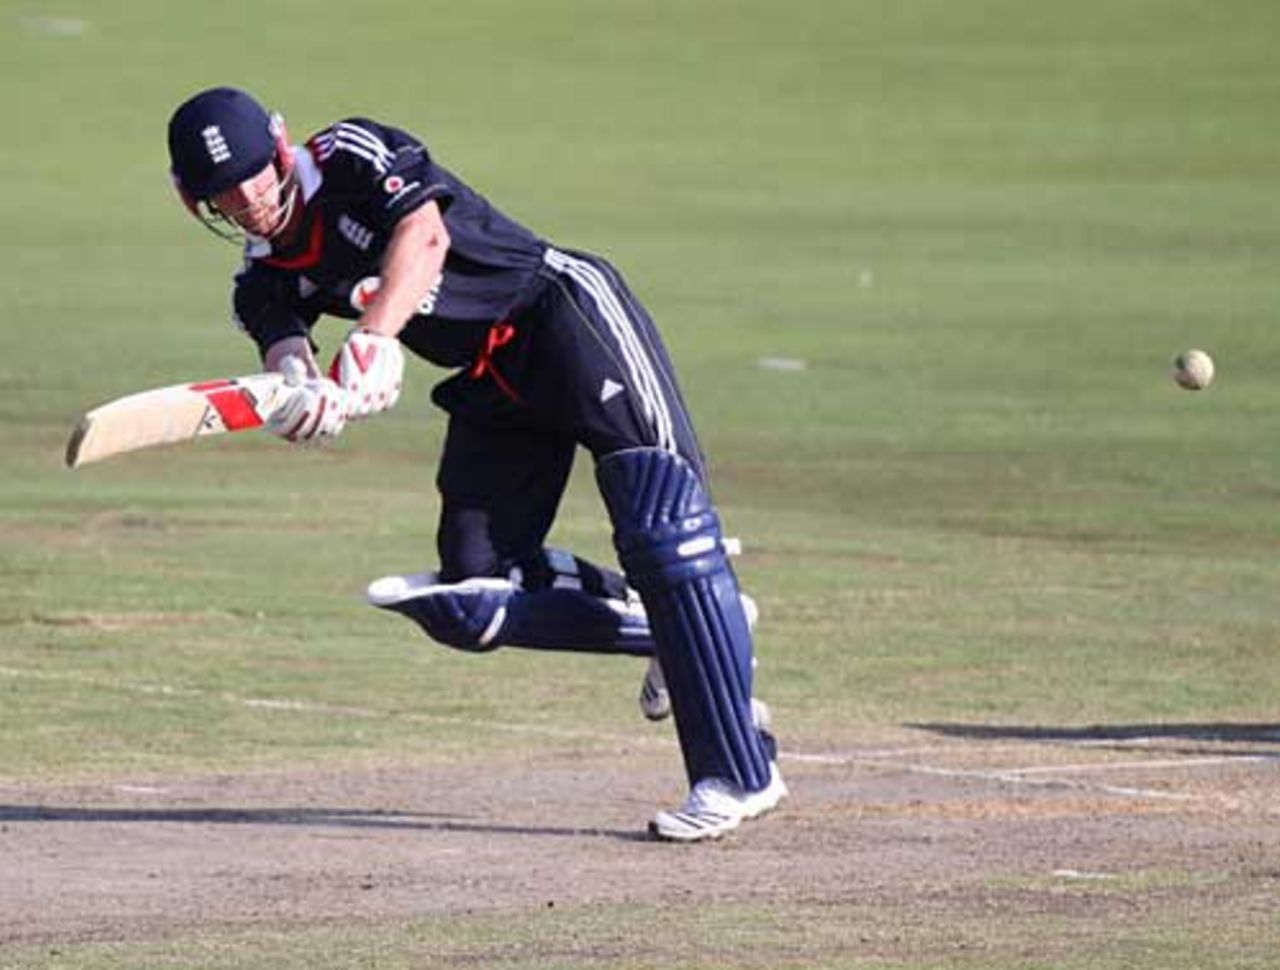 Paul Collingwood's fifth ODI hundred was an outstanding innings, South Africa v England, 2nd ODI, Centurion, November 22, 2009